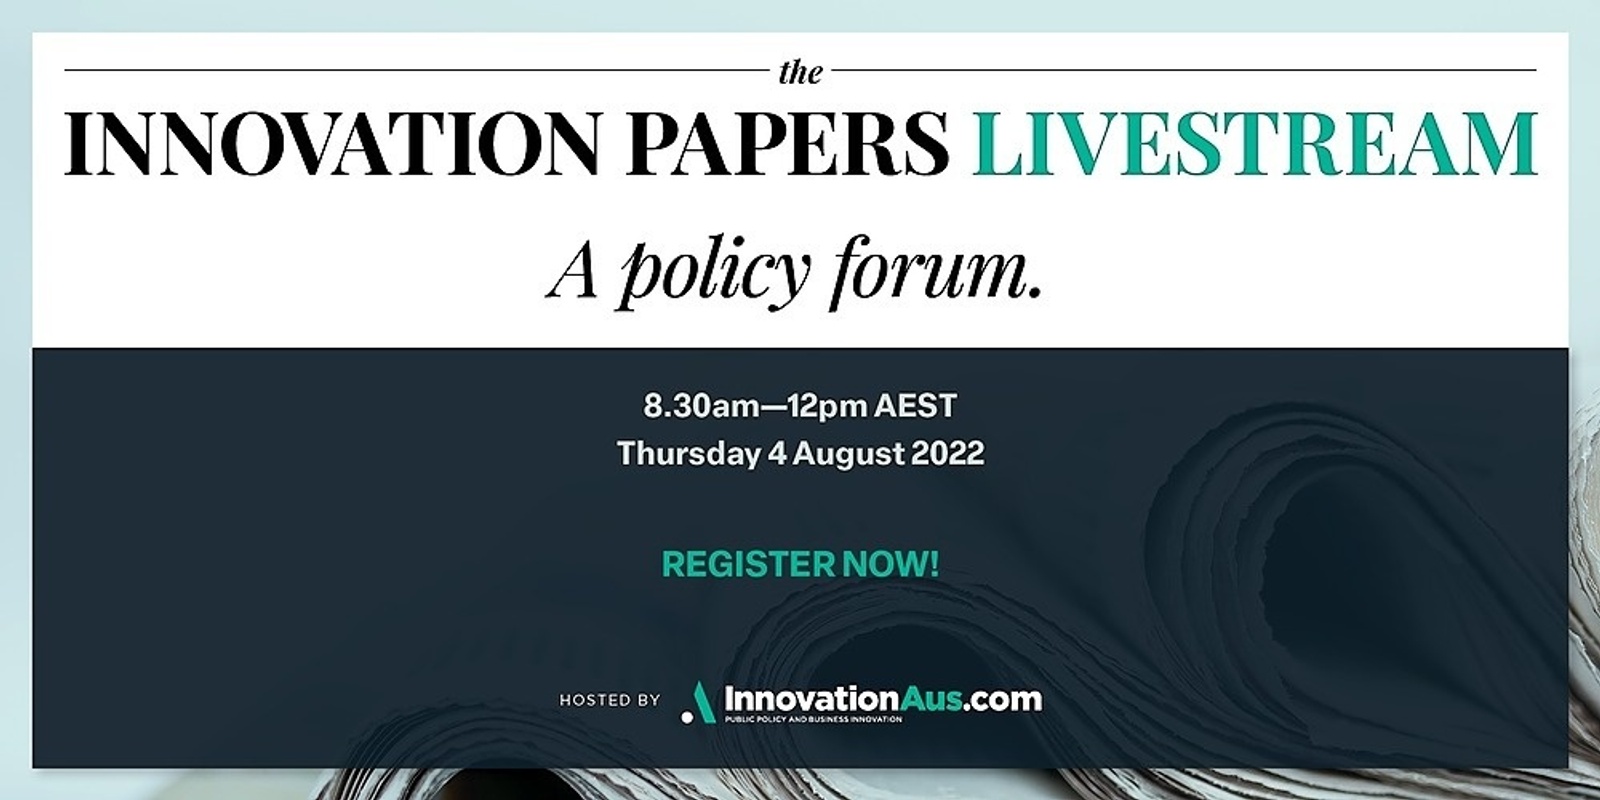 Banner image for Innovation Papers Livestream 